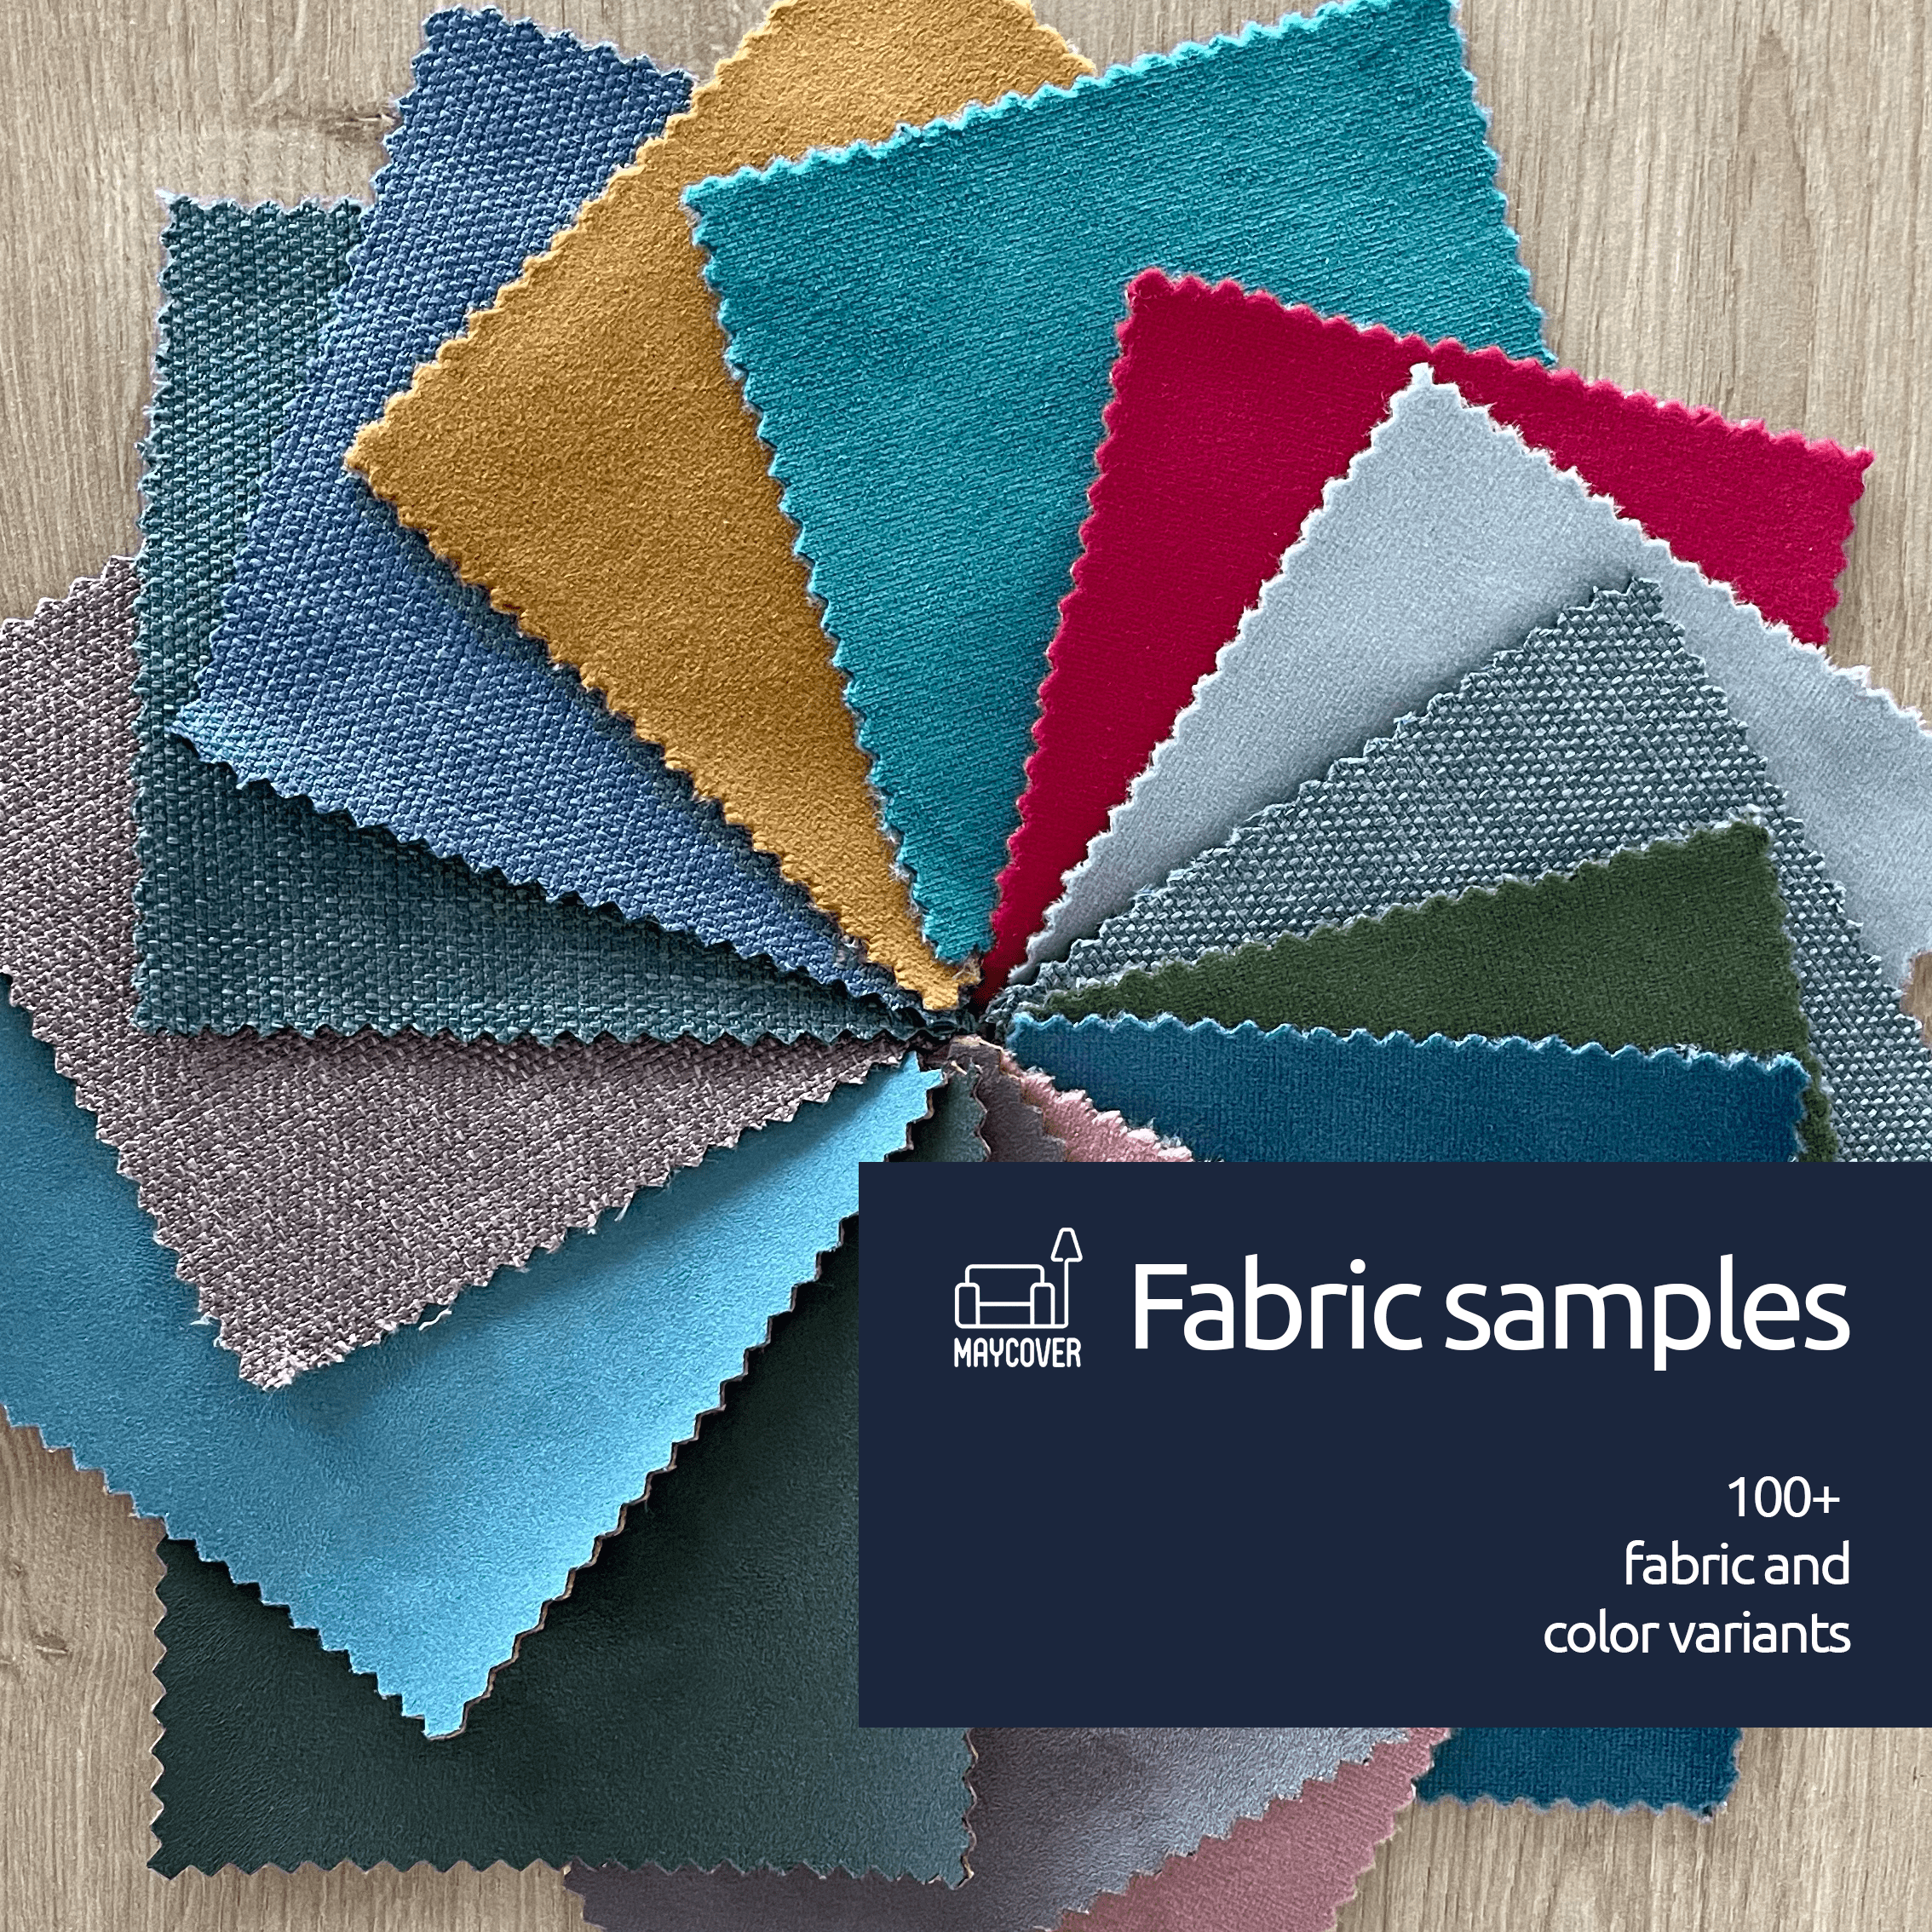 Japanese Fabric Sample Portfolio with over 400 fabric swatches